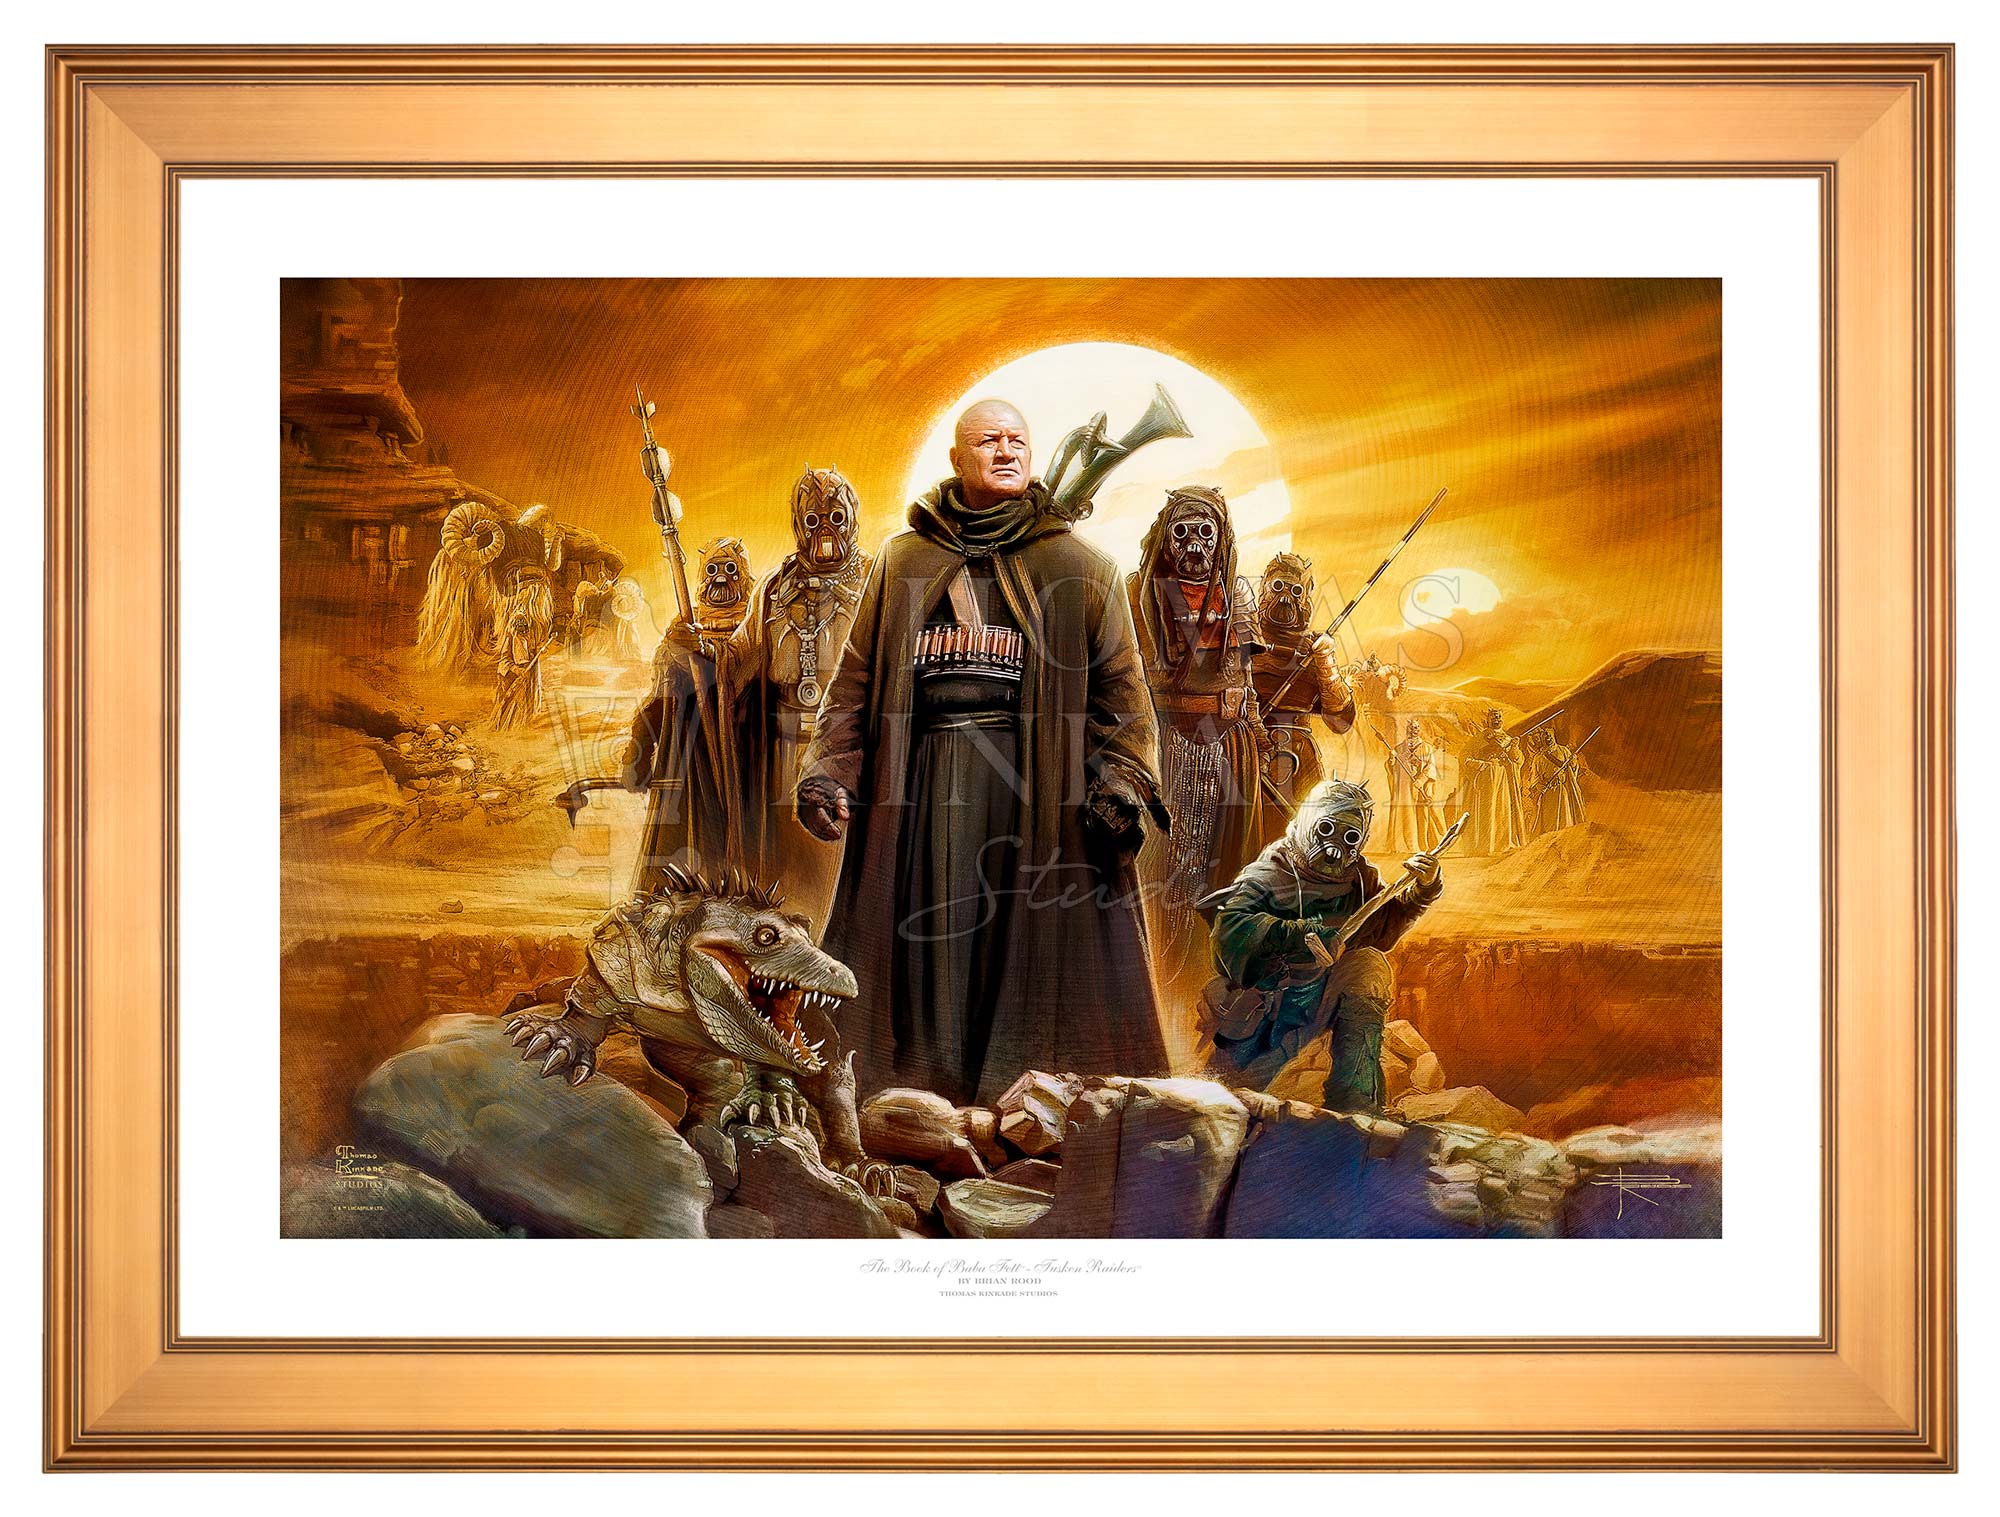 Gallery Gold - Frame